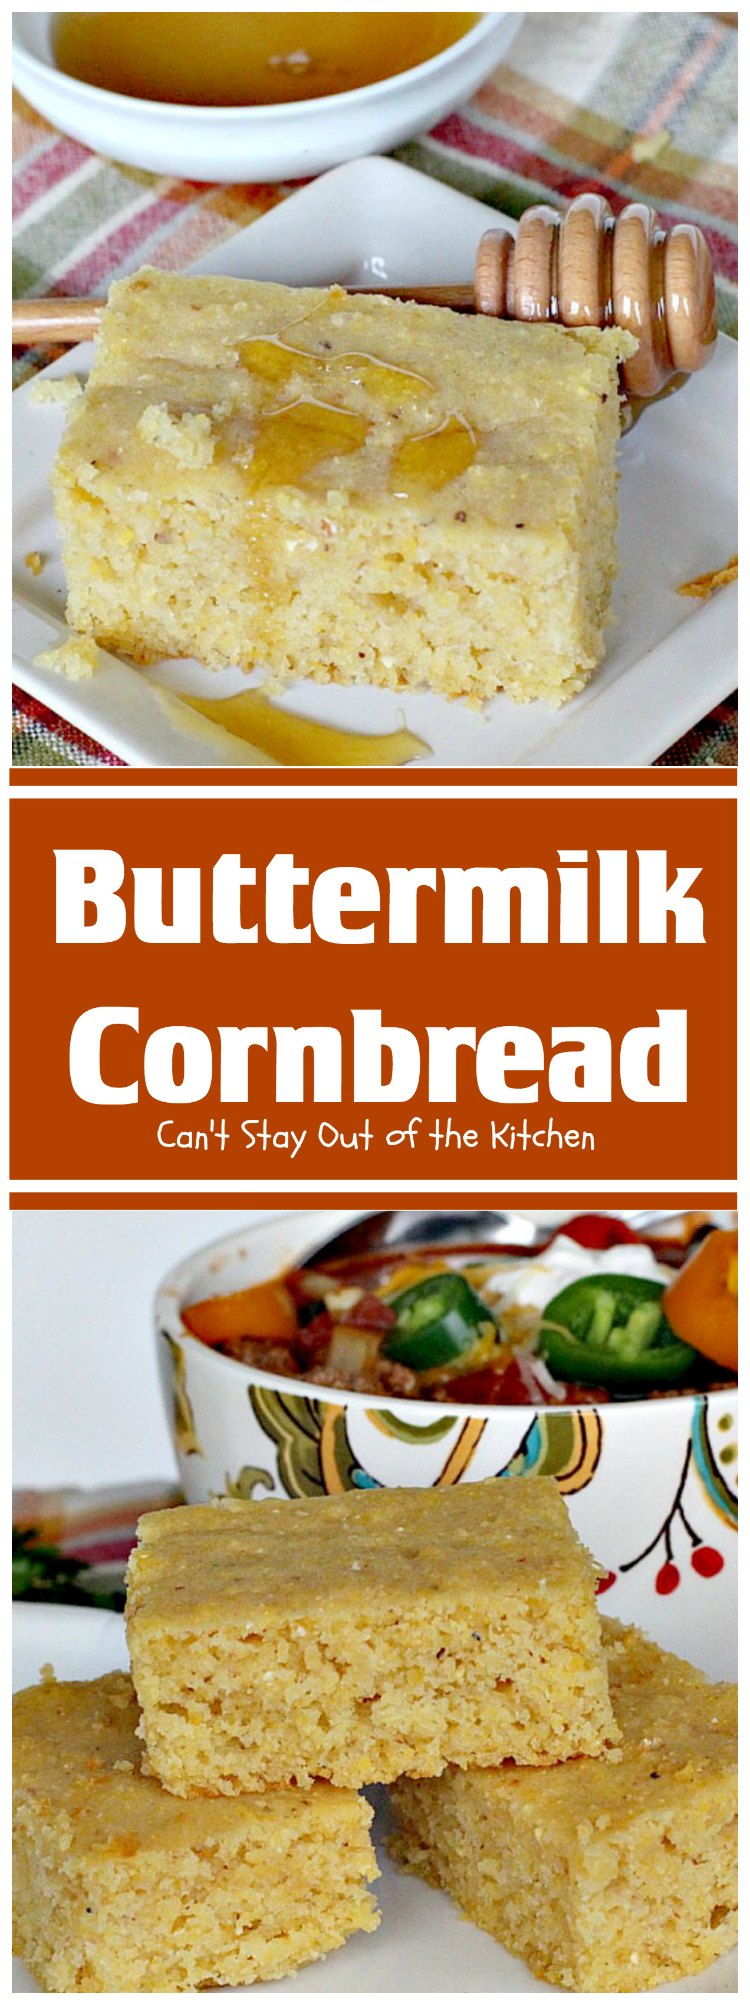 Buttermilk Cornbread - Can't Stay Out of the Kitchen